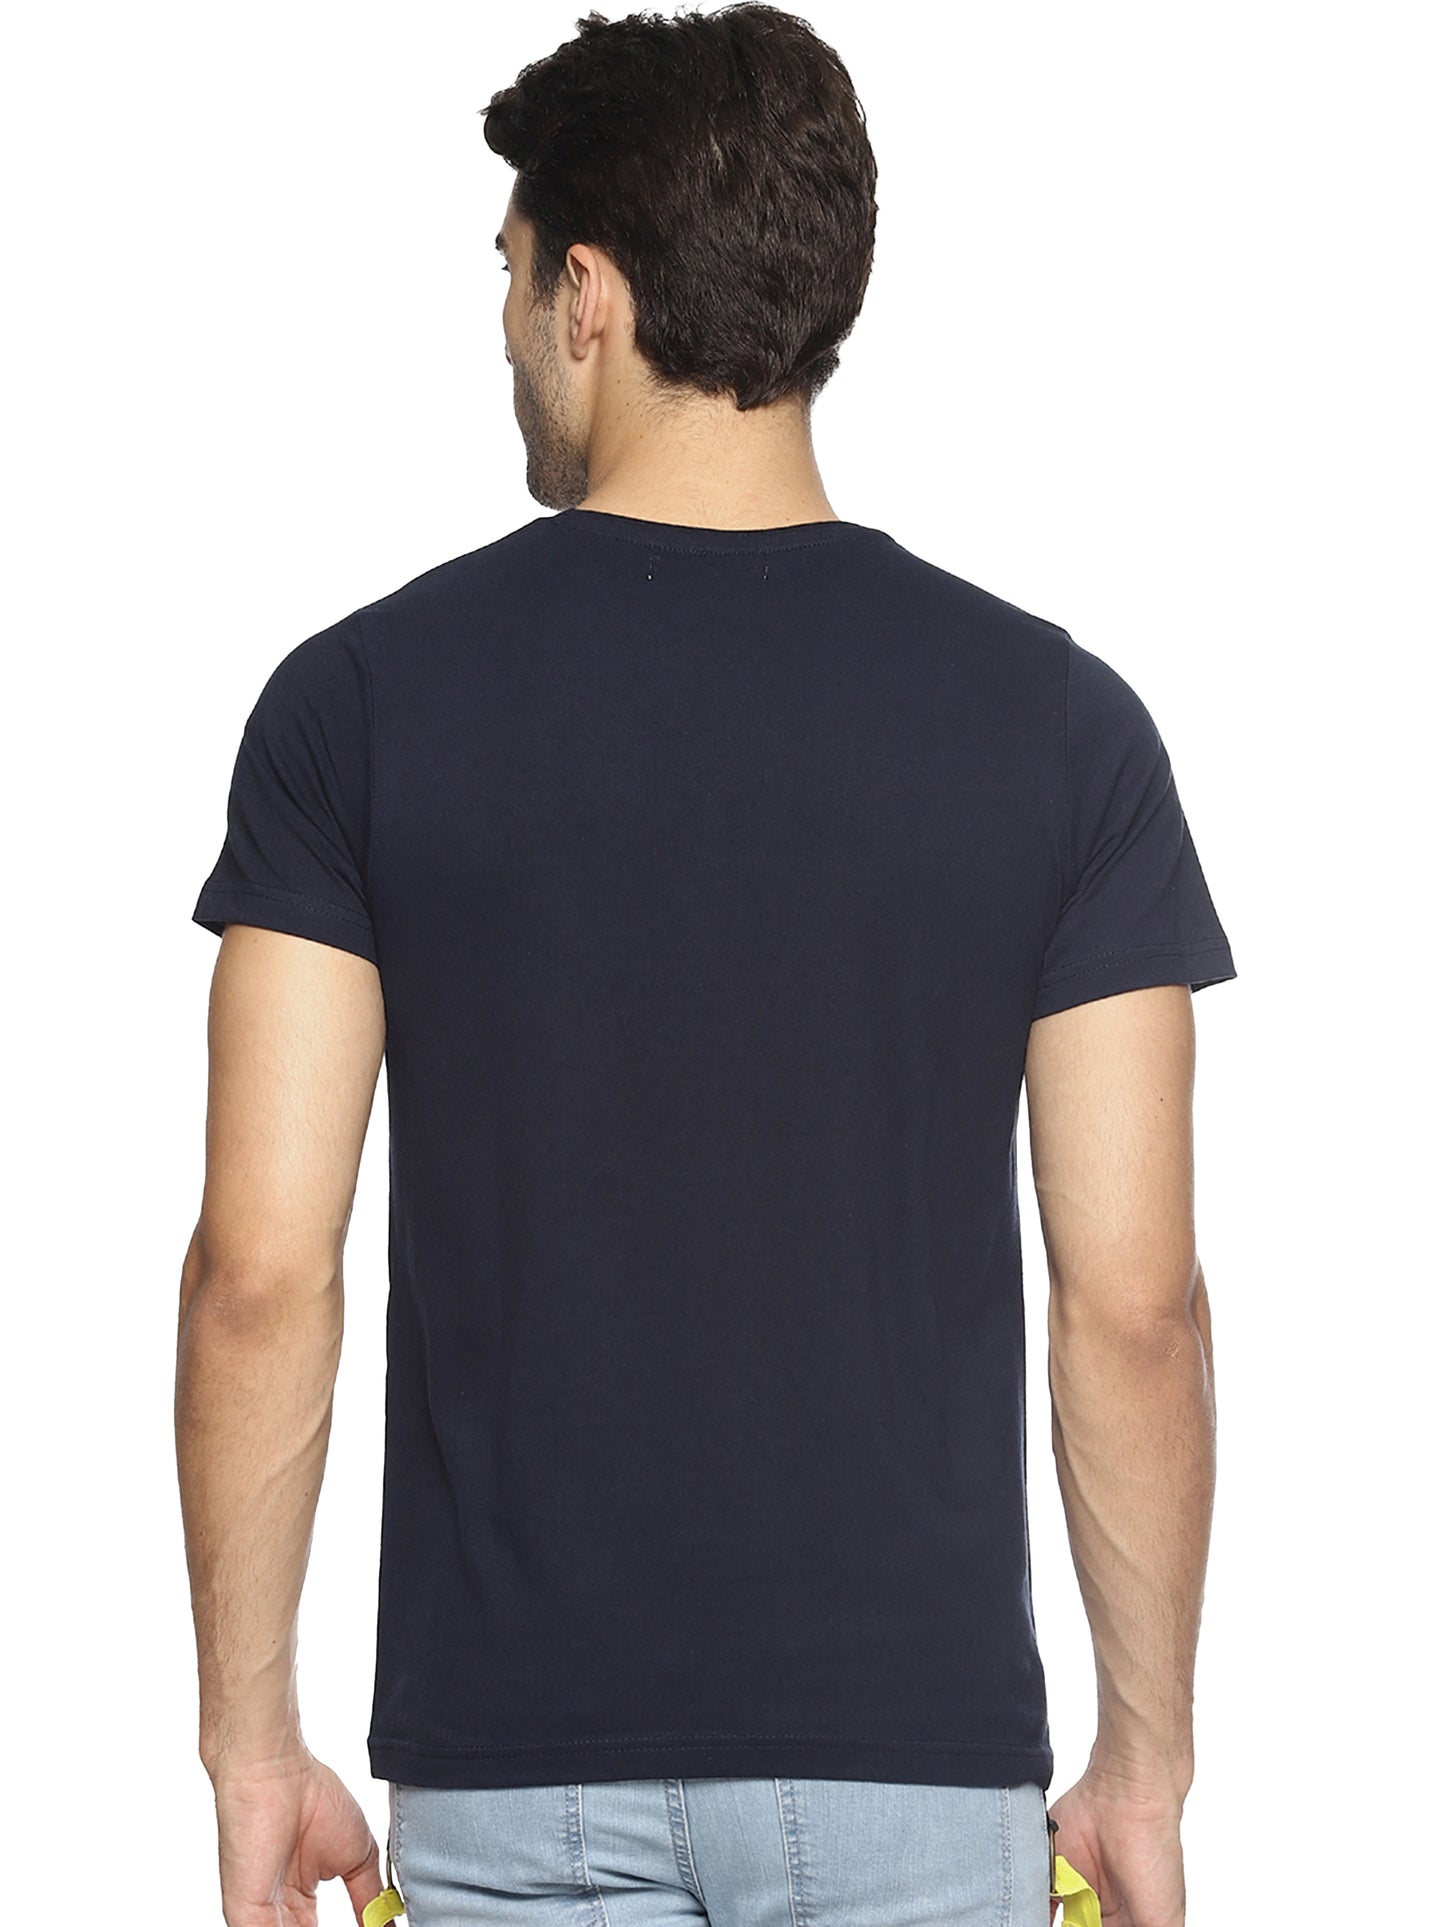 OBOW Navy Blue Printed Quirky Cricket worldcup Round Neck Half Sleeve Cotton Tshirt